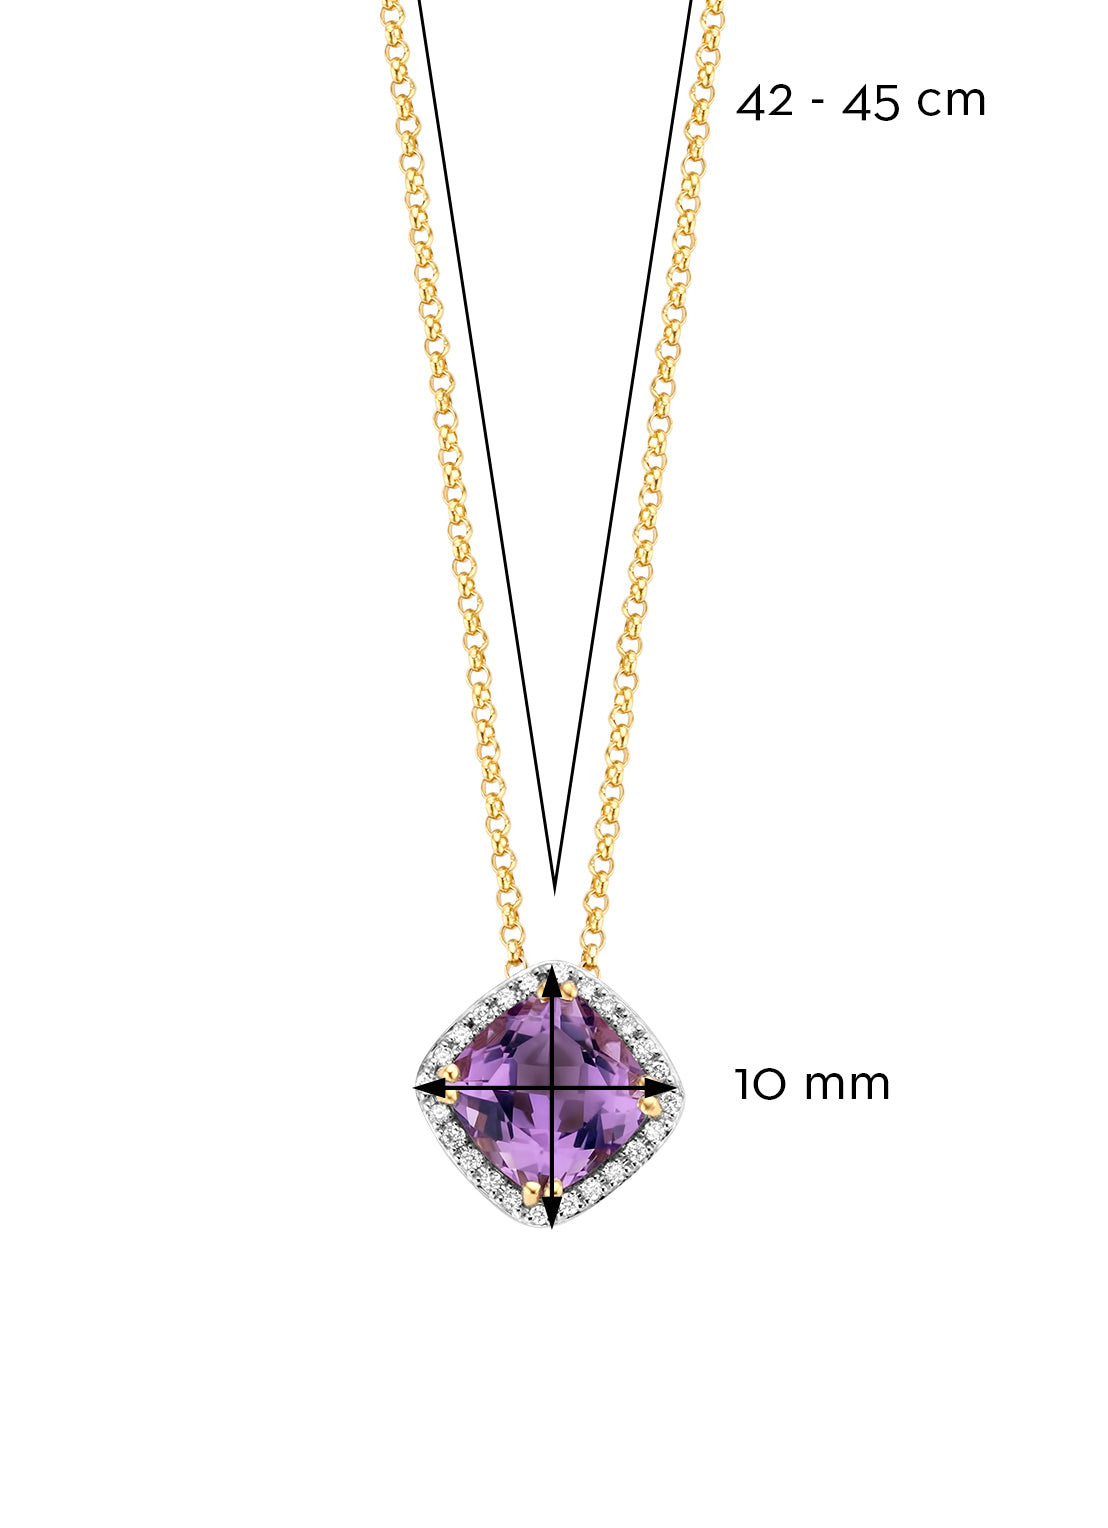 Yellow gold pendant with necklace, 1.54 ct Purple Amethist, Fiësta